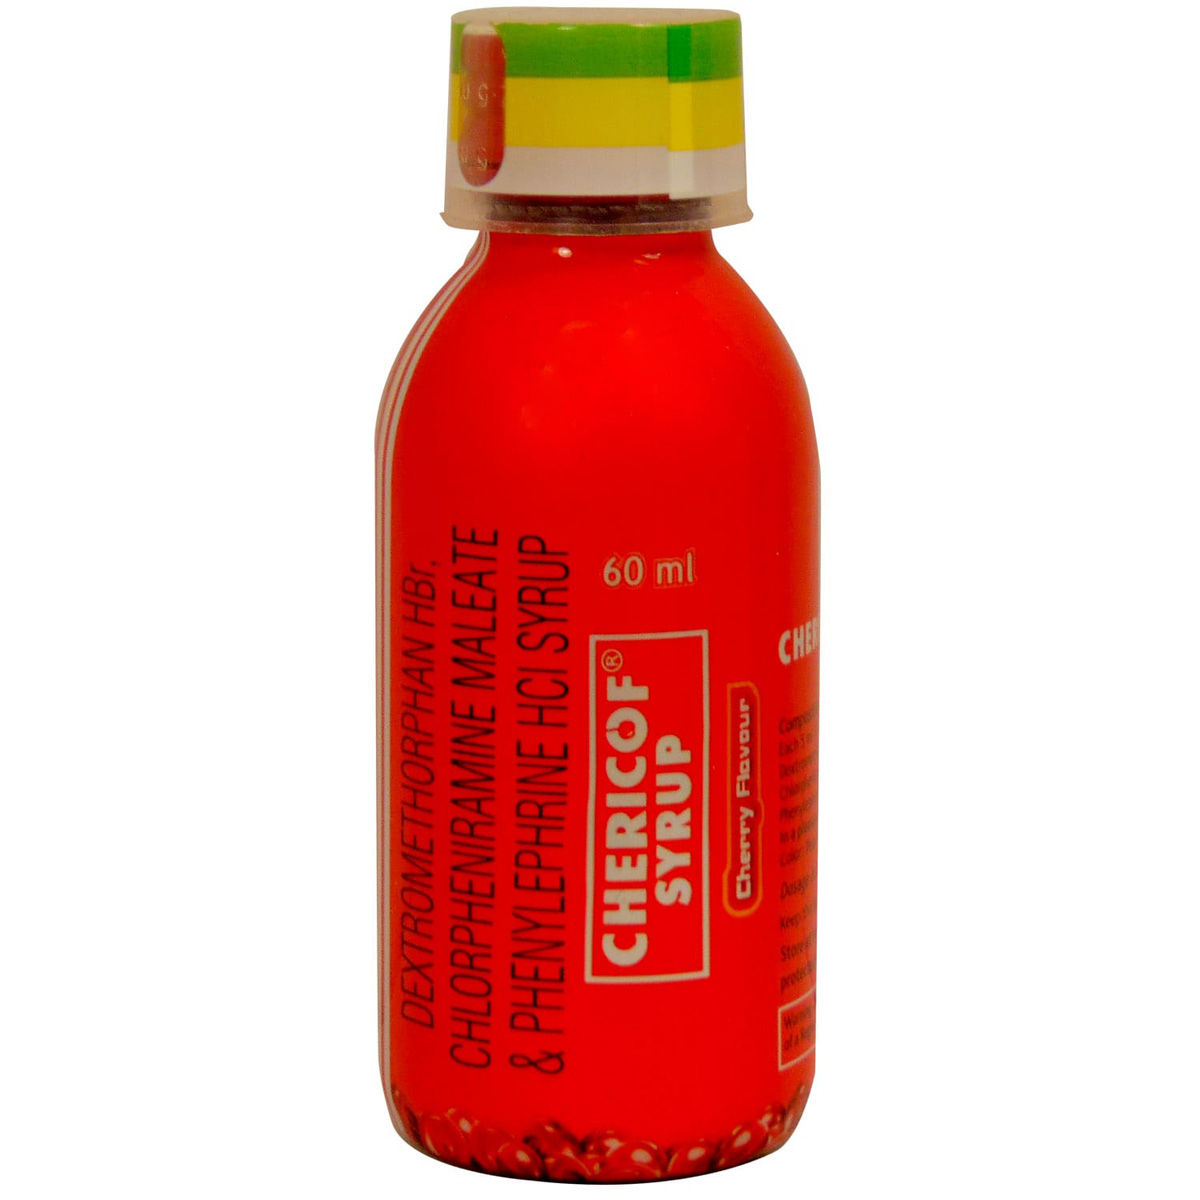 Chericof Syrup 60 ml, Pack of 1 Syrup